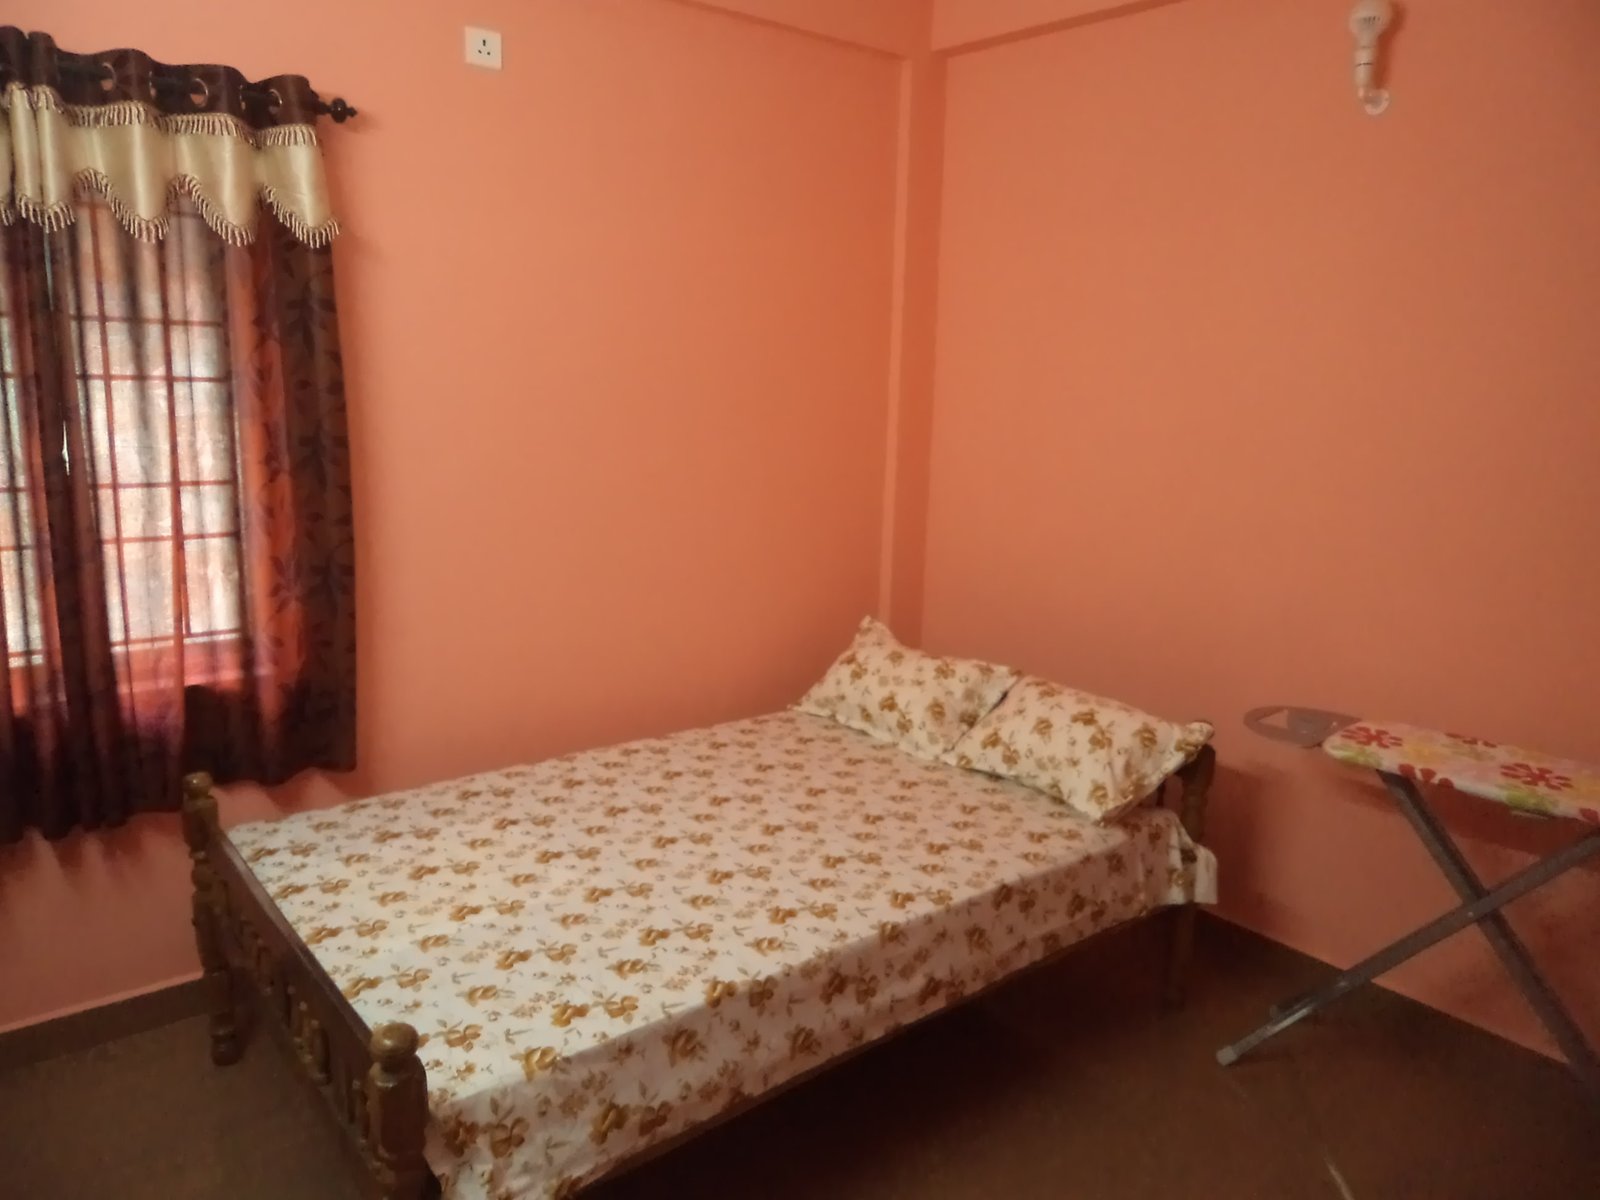 3 bedroom furnished apartment for one month rent in kottayam